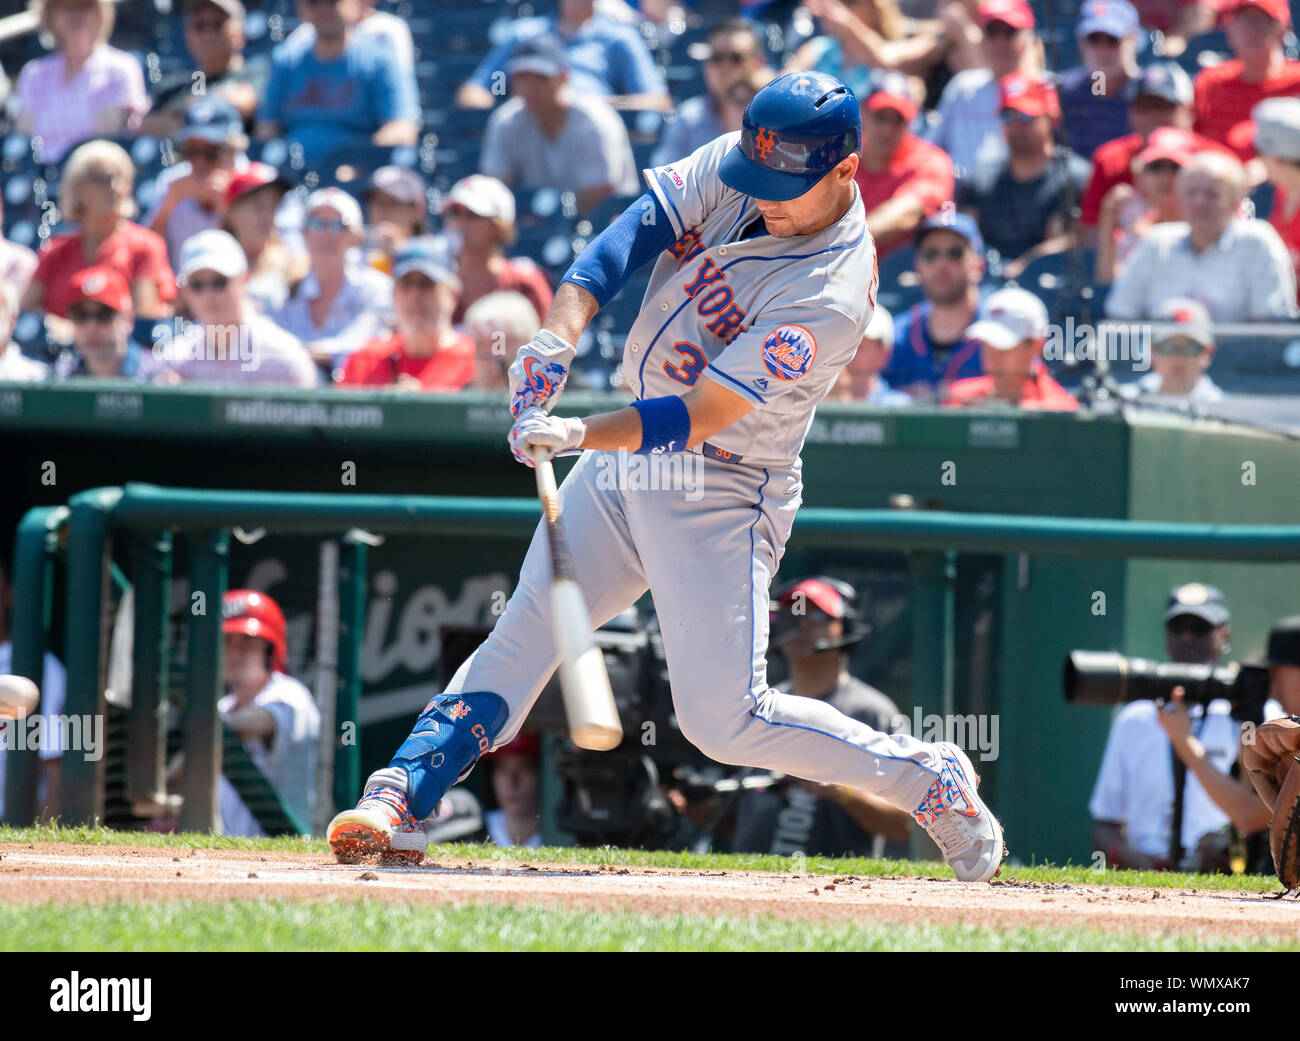 Washington, United States Of America. 04th Sep, 2019. New York Mets right fielder Michael Conforto (30) bats in the first inning against the Washington Nationals at Nationals Park in Washington, DC on Wednesday, September 4, 2019. Credit: Ron Sachs/CNP (RESTRICTION: NO New York or New Jersey Newspapers or newspapers within a 75 mile radius of New York City) | usage worldwide Credit: dpa/Alamy Live News Stock Photo